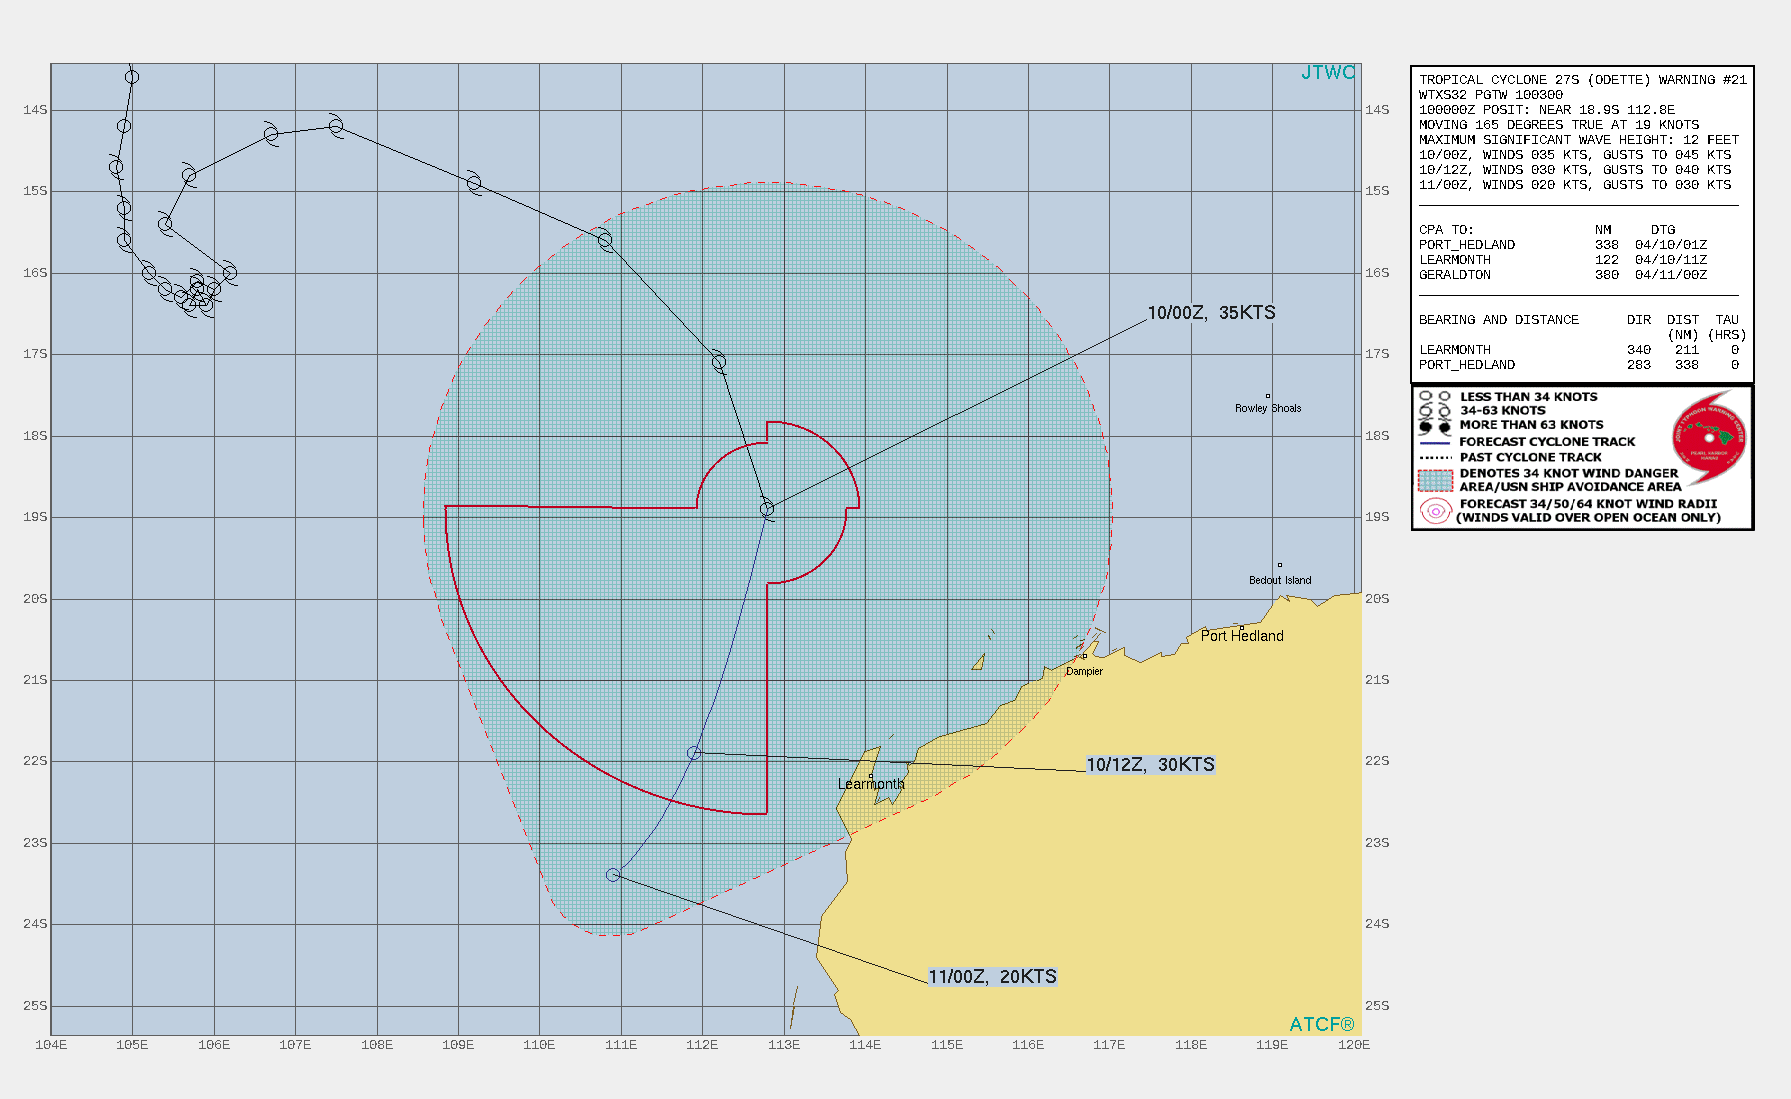 27S(ODETTE). WARNING 21 ISSUED AT 10/03UTC.UPPER-LEVEL ANALYSIS  REVEALS A MARGINAL ENVIRONMENT DUE TO THE PROXIMITY TO TC 26S WHICH  IS CREATING MODERATE TO HIGH VERTICAL WIND SHEAR (15-25 KTS) AND  SUPPRESSING OUTFLOW. TC 27S IS CURRENTLY ROTATING CYCLONICALLY  AROUND THE EASTERN PERIPHERY OF TC 26S AND IS EXPECTED TO COMPLETE  THE FUJIWHARA INTERACTION AS IT BECOMES ABSORBED IN TC 26S WITH  DISSIPATION EXPECTED BY 12H.